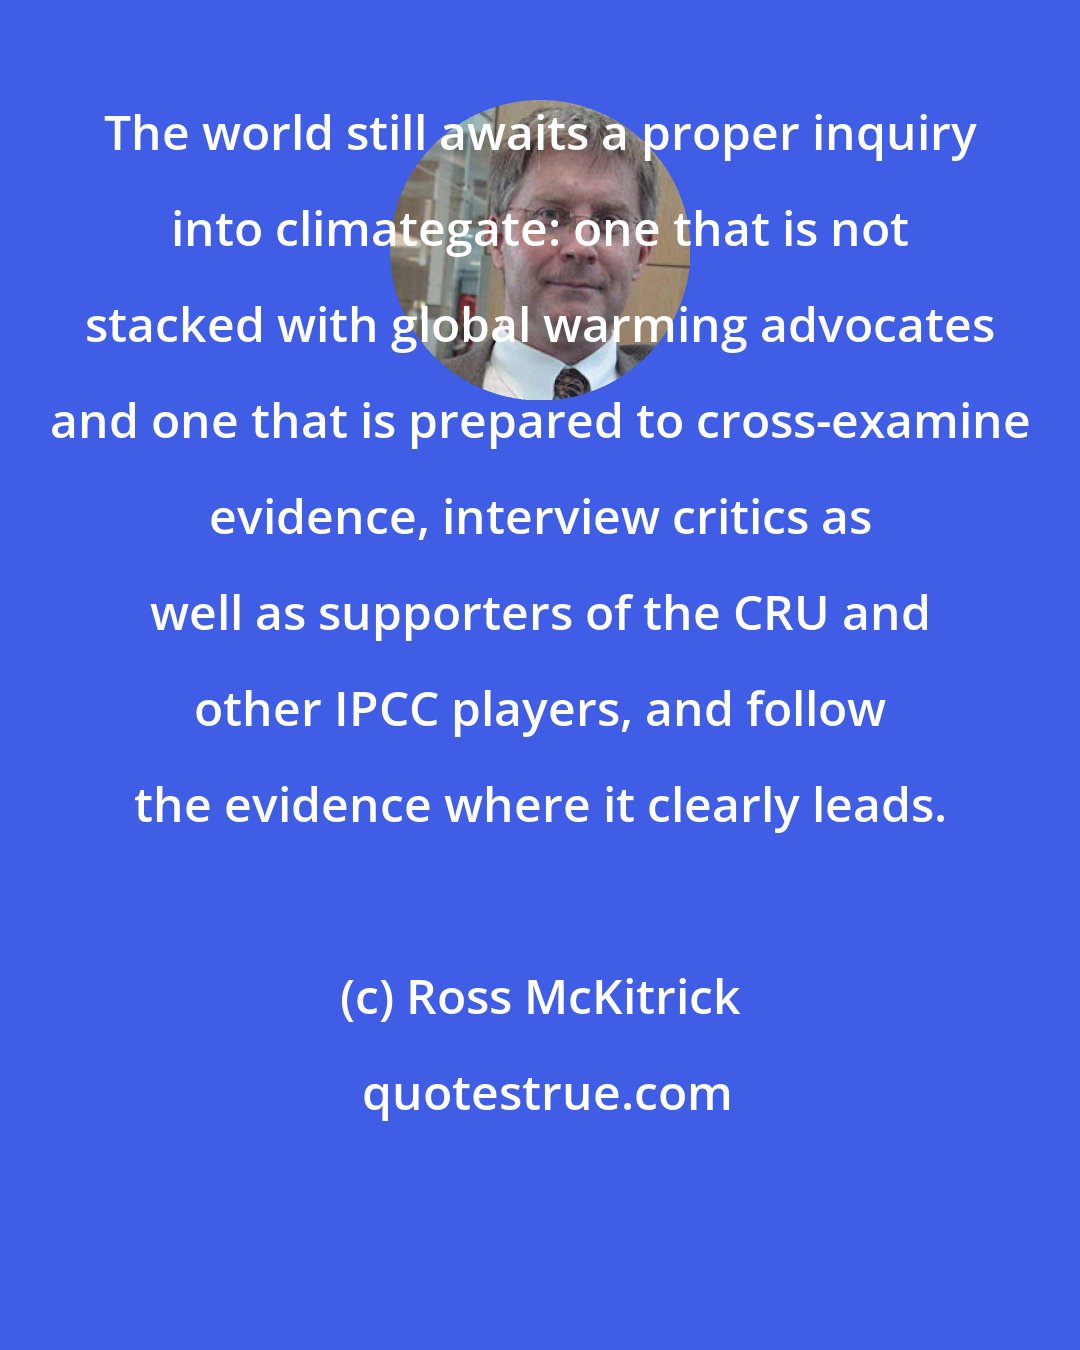 Ross McKitrick: The world still awaits a proper inquiry into climategate: one that is not stacked with global warming advocates and one that is prepared to cross-examine evidence, interview critics as well as supporters of the CRU and other IPCC players, and follow the evidence where it clearly leads.